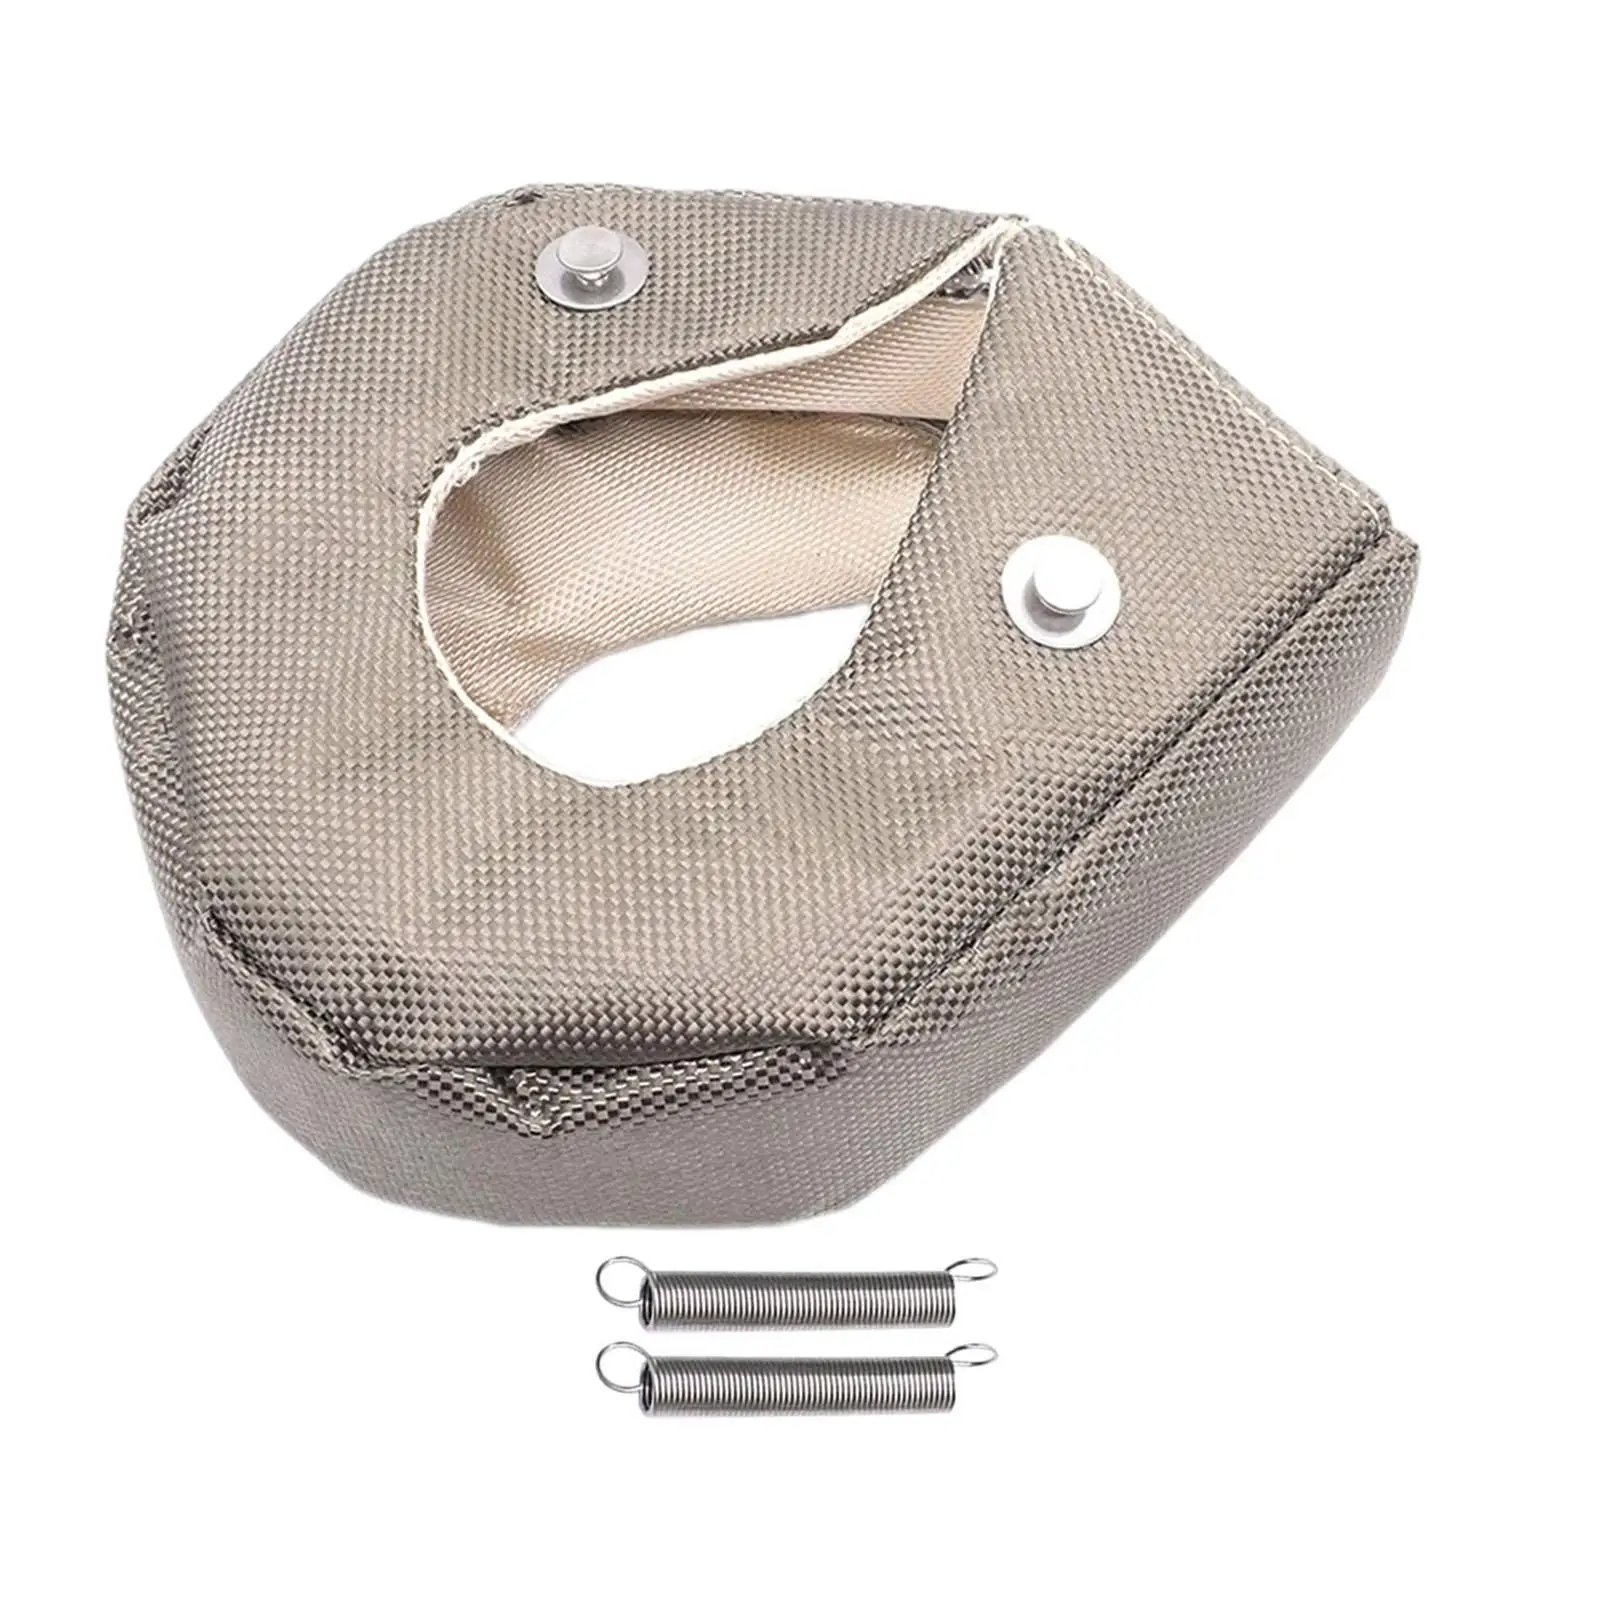 Turbocharger Heat Shield Cover Auto Accessory Easy to Install